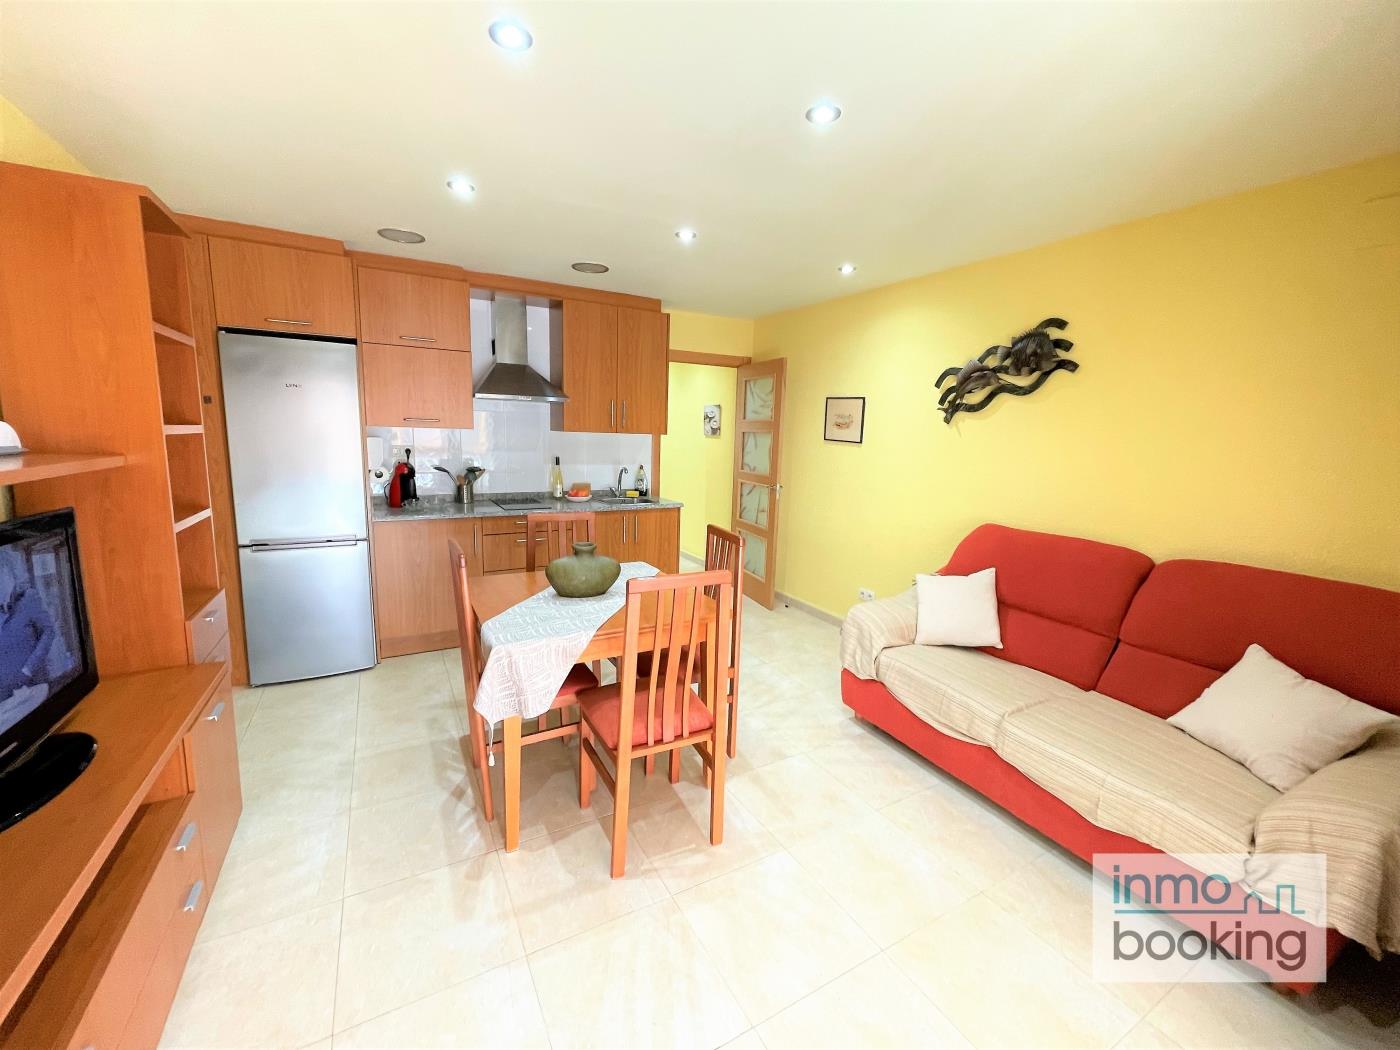 Anabella, air-conditioned, community parking and close to the beach in Cambrils